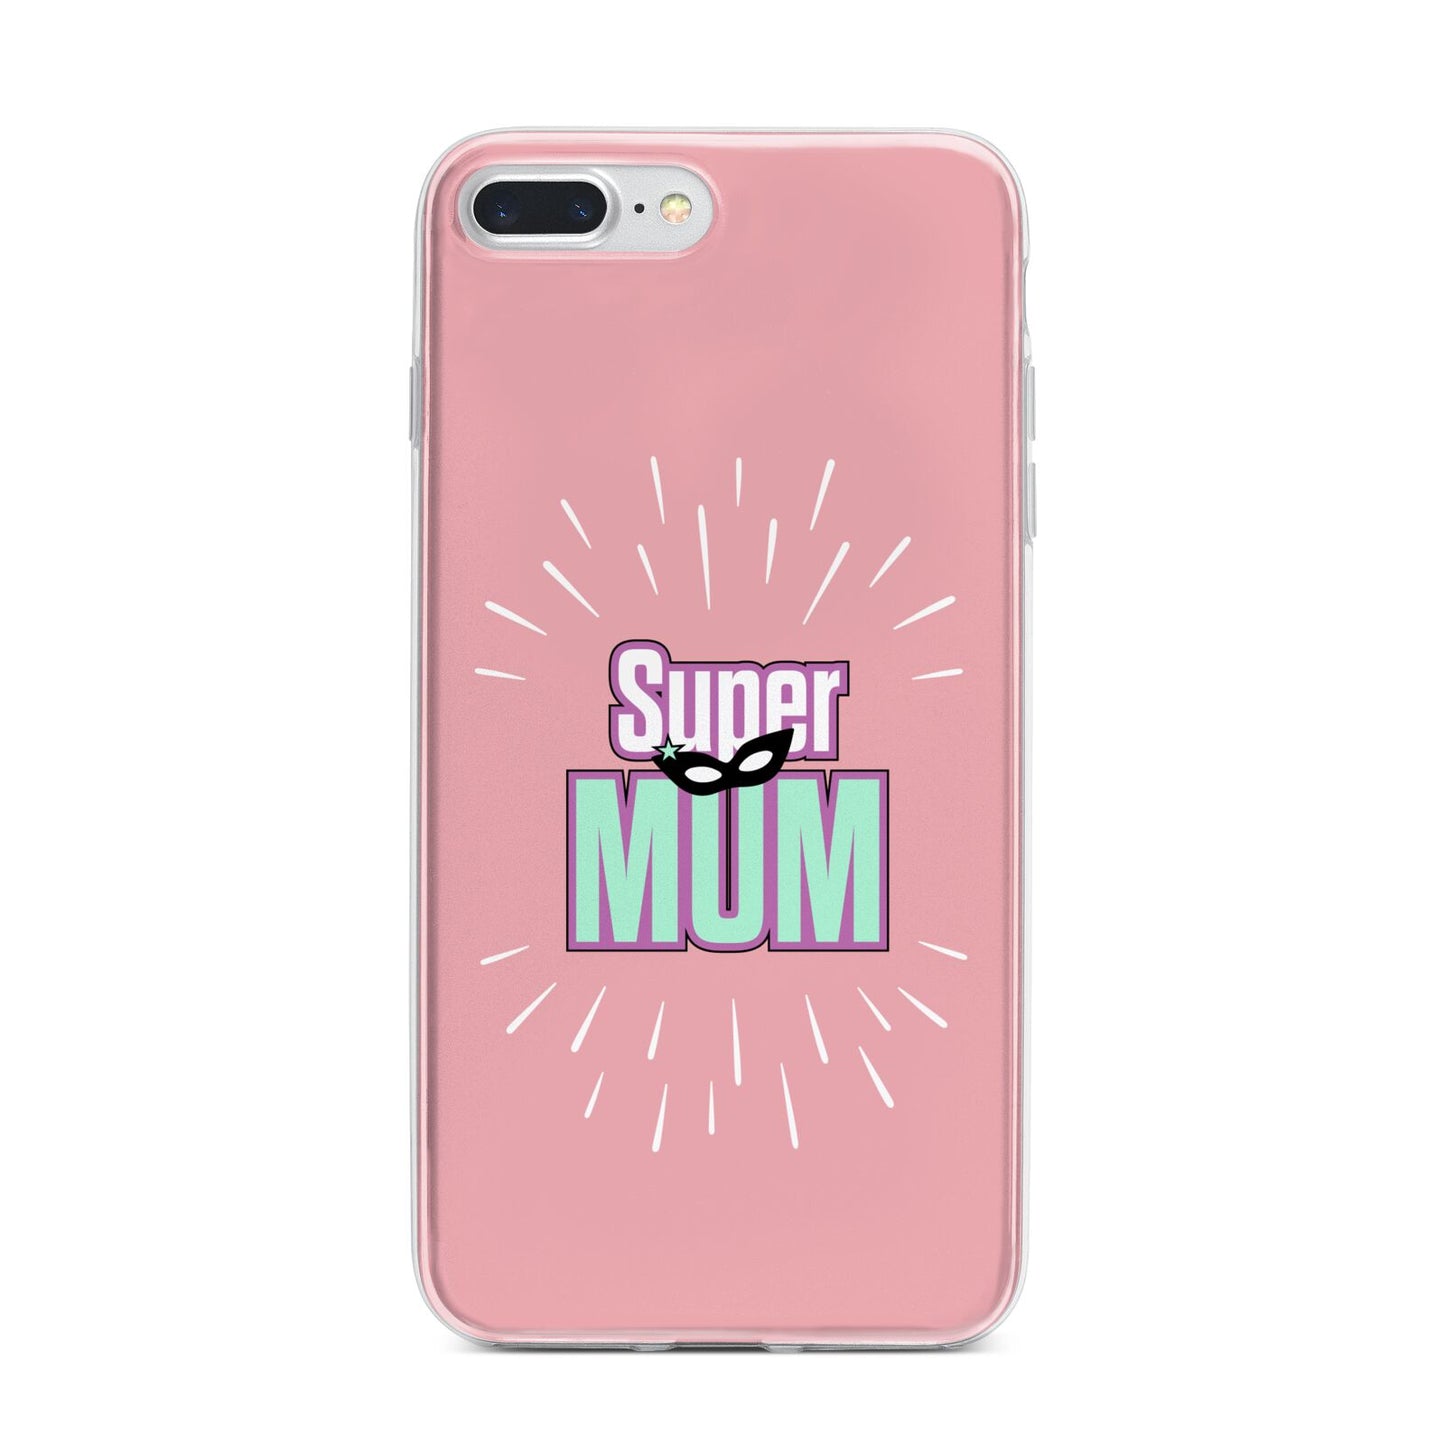 Super Mum Mothers Day iPhone 7 Plus Bumper Case on Silver iPhone